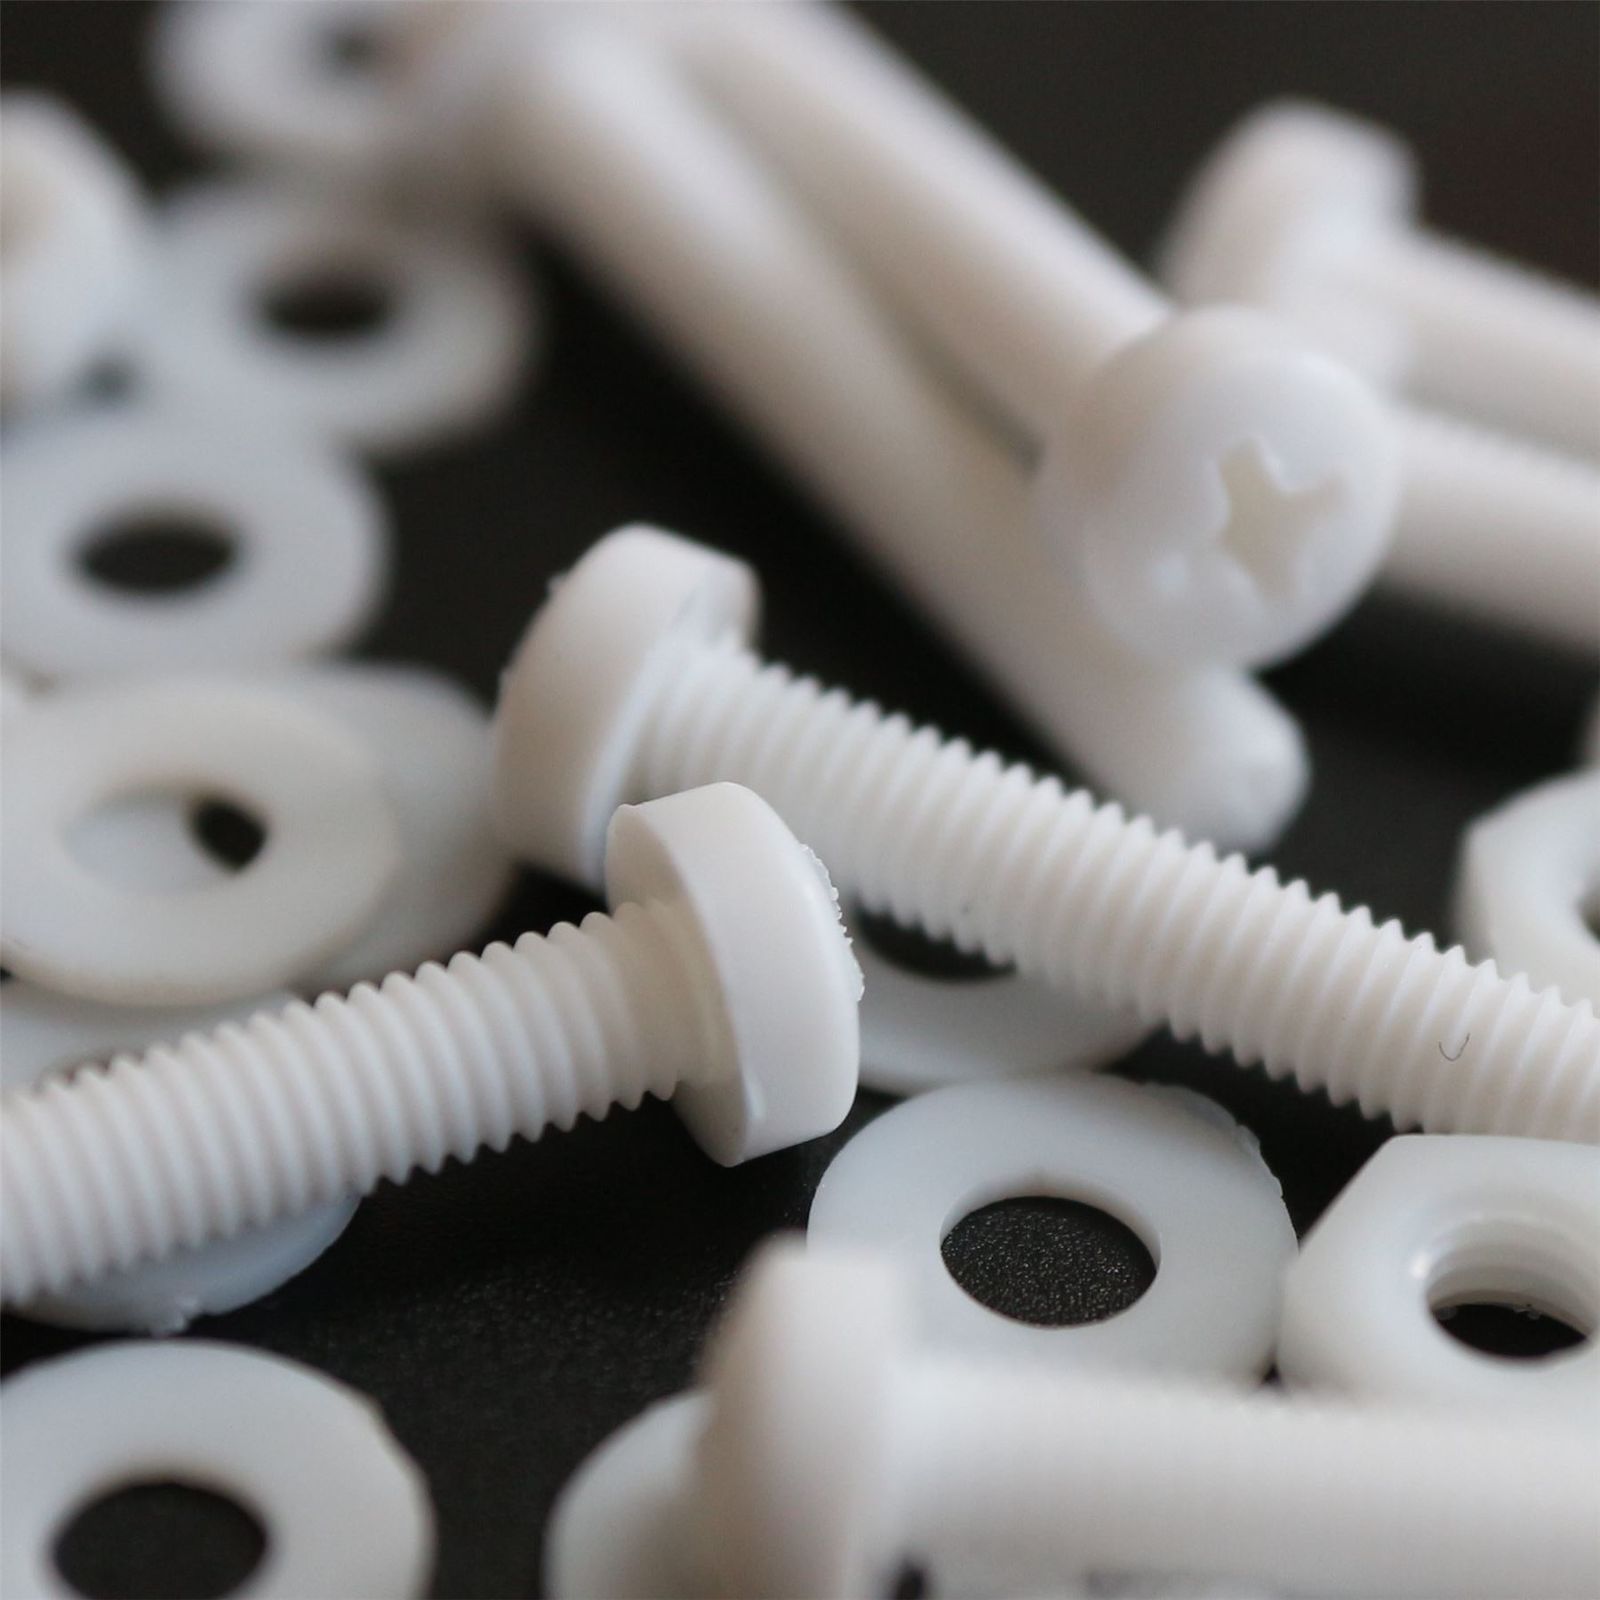 Primary image for 20x White Screws Plastic Nuts & Bolts, Washers, M3 x 20mm, Anti-Corrosion